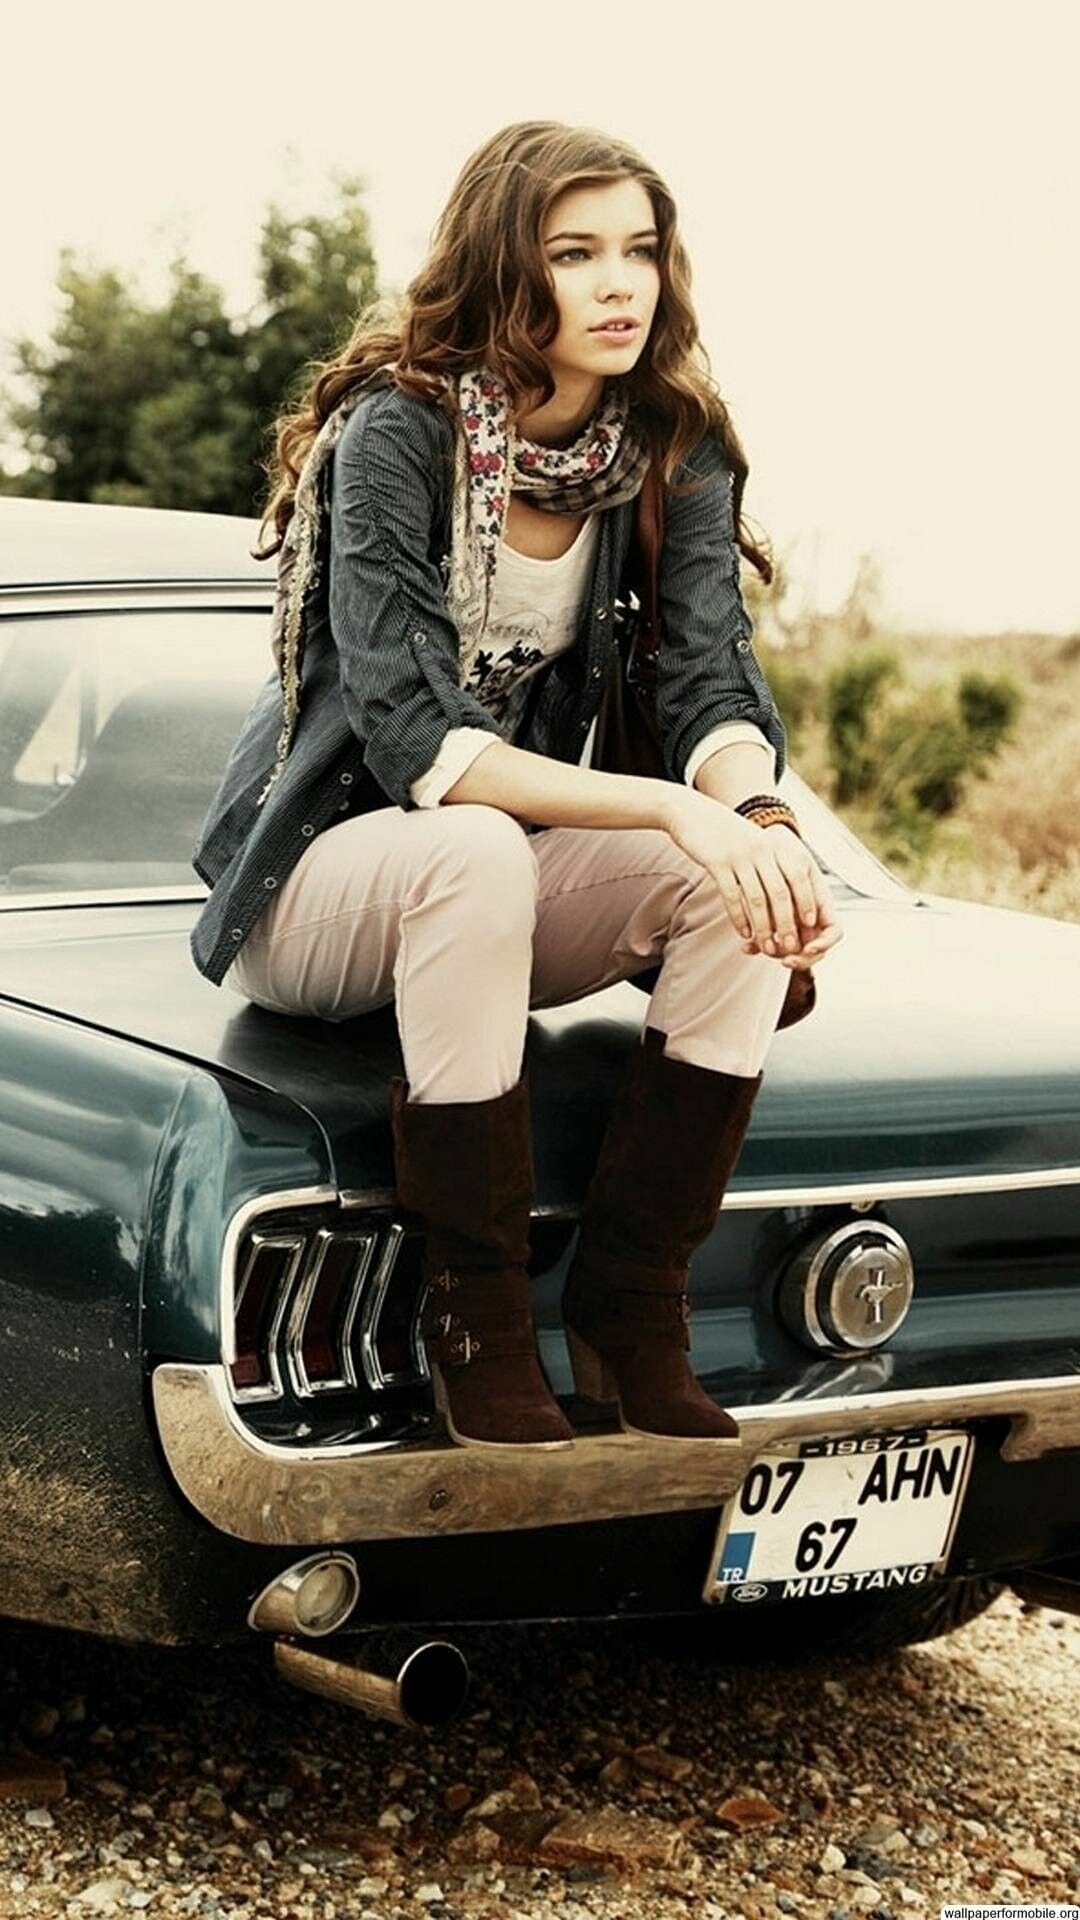 Girls and Muscle Cars: Ford Mustang 1967, Off-roading, Chrome rear bumper, License plate. 1080x1920 Full HD Wallpaper.